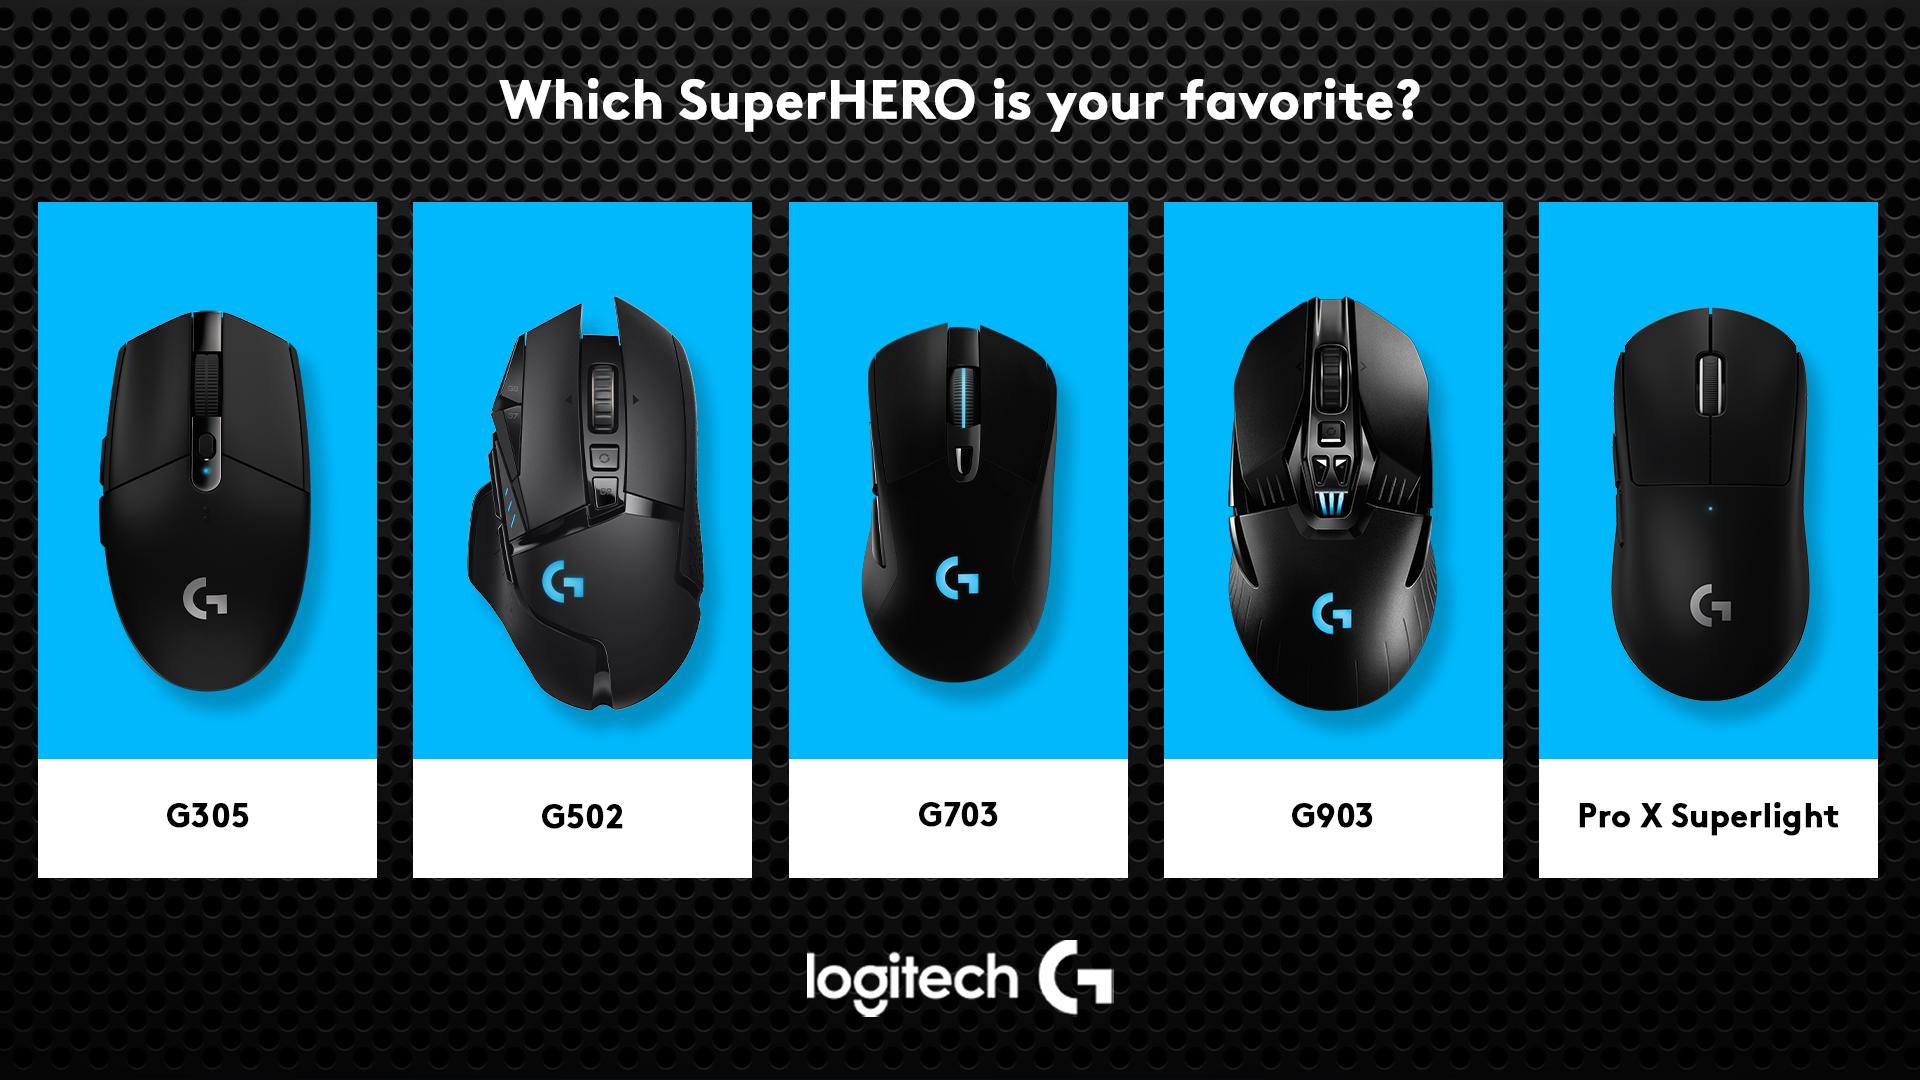 Logitech G on Twitter: "Happy National SuperHERO Day! Which which one these wireless HERO mice are you running for your setup? https://t.co/ppmB7viLcf" / Twitter